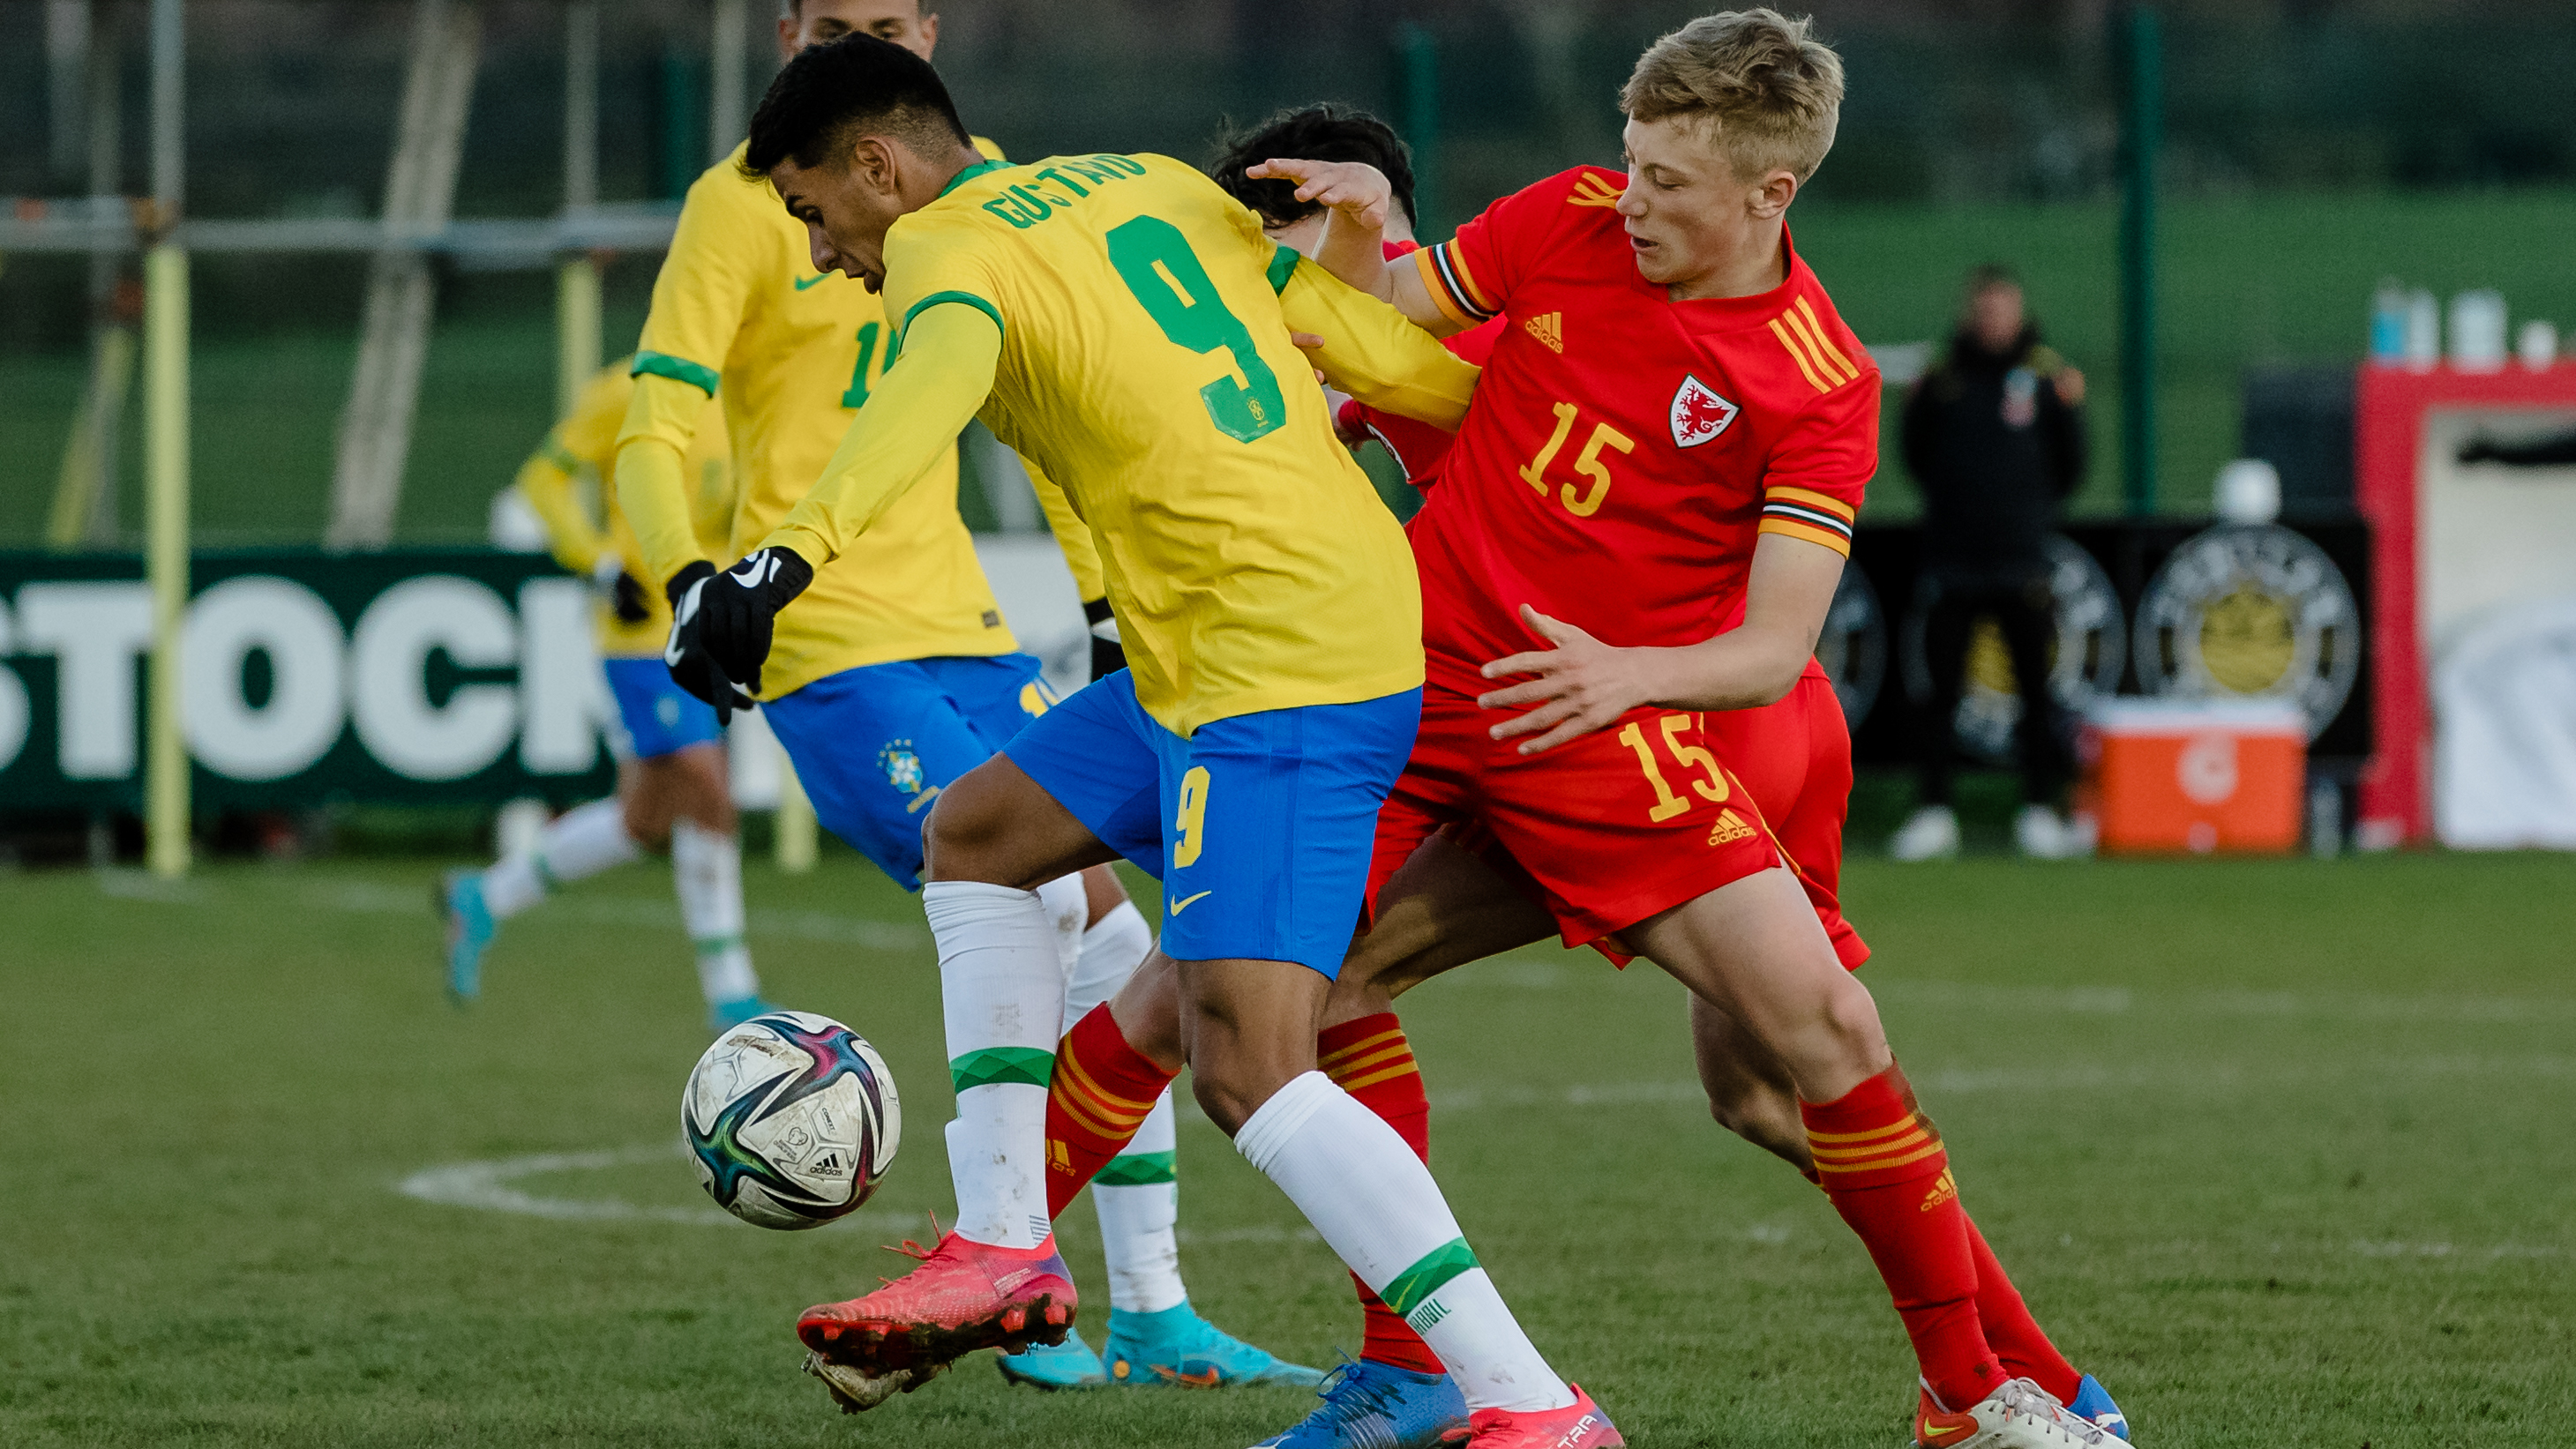 Jacob Cook of Wales and Swansea tackles Brazil player